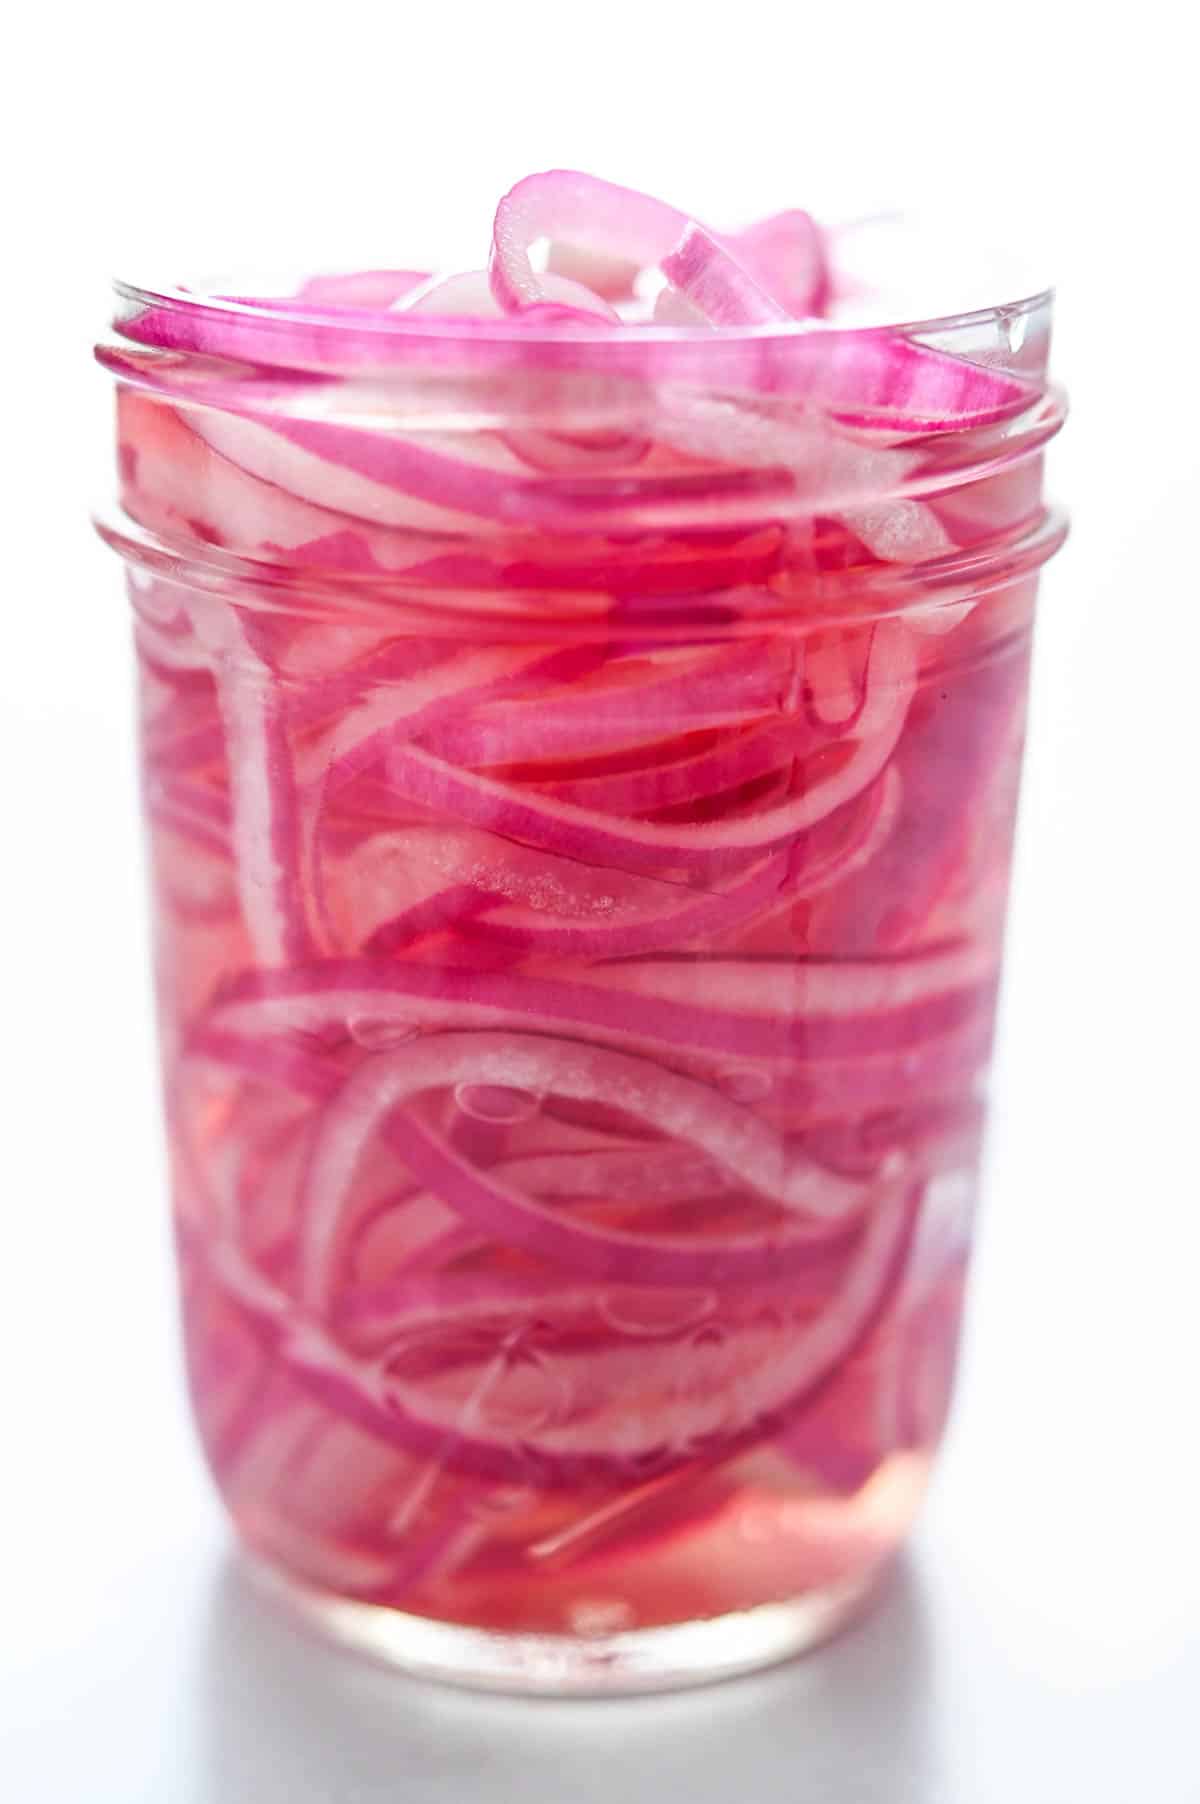 An 8 ounce jar of pickled onions and brine.